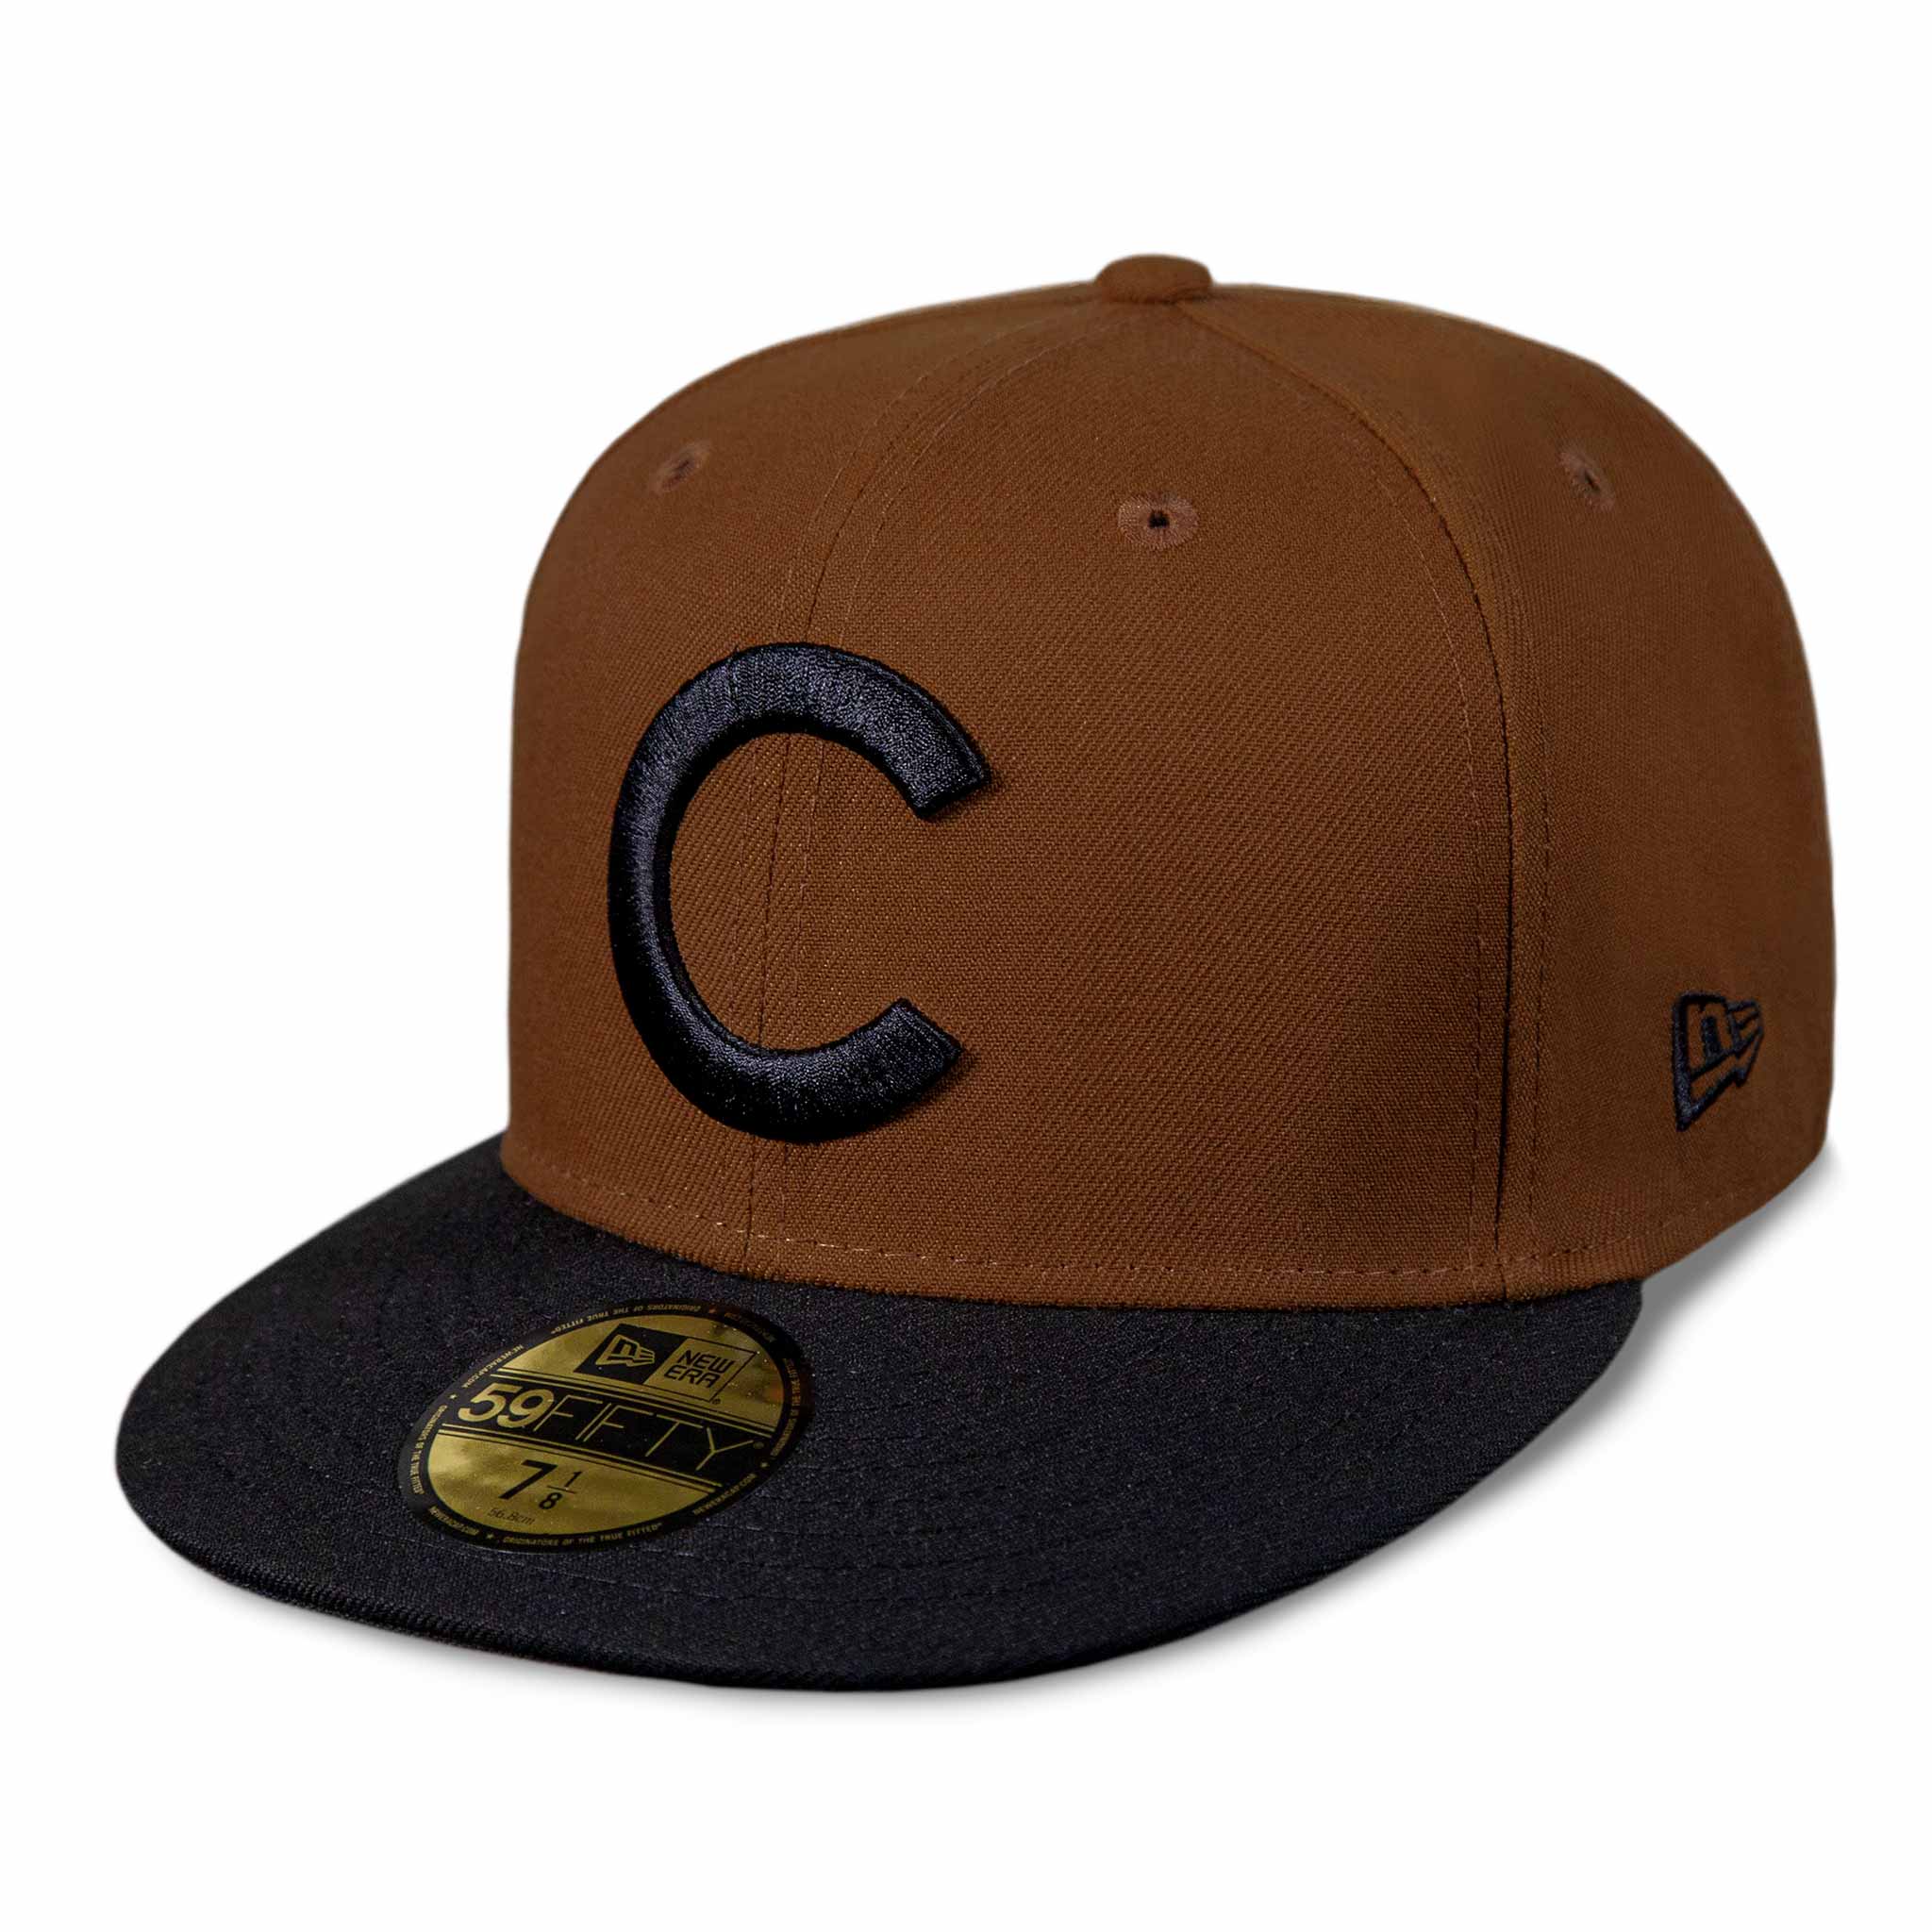 Chicago Cubs 1969 Two Tone Wrigley Field 59FIFTY Fitted Cap 7 3/8 = 23 1/8 in = 58.7 cm